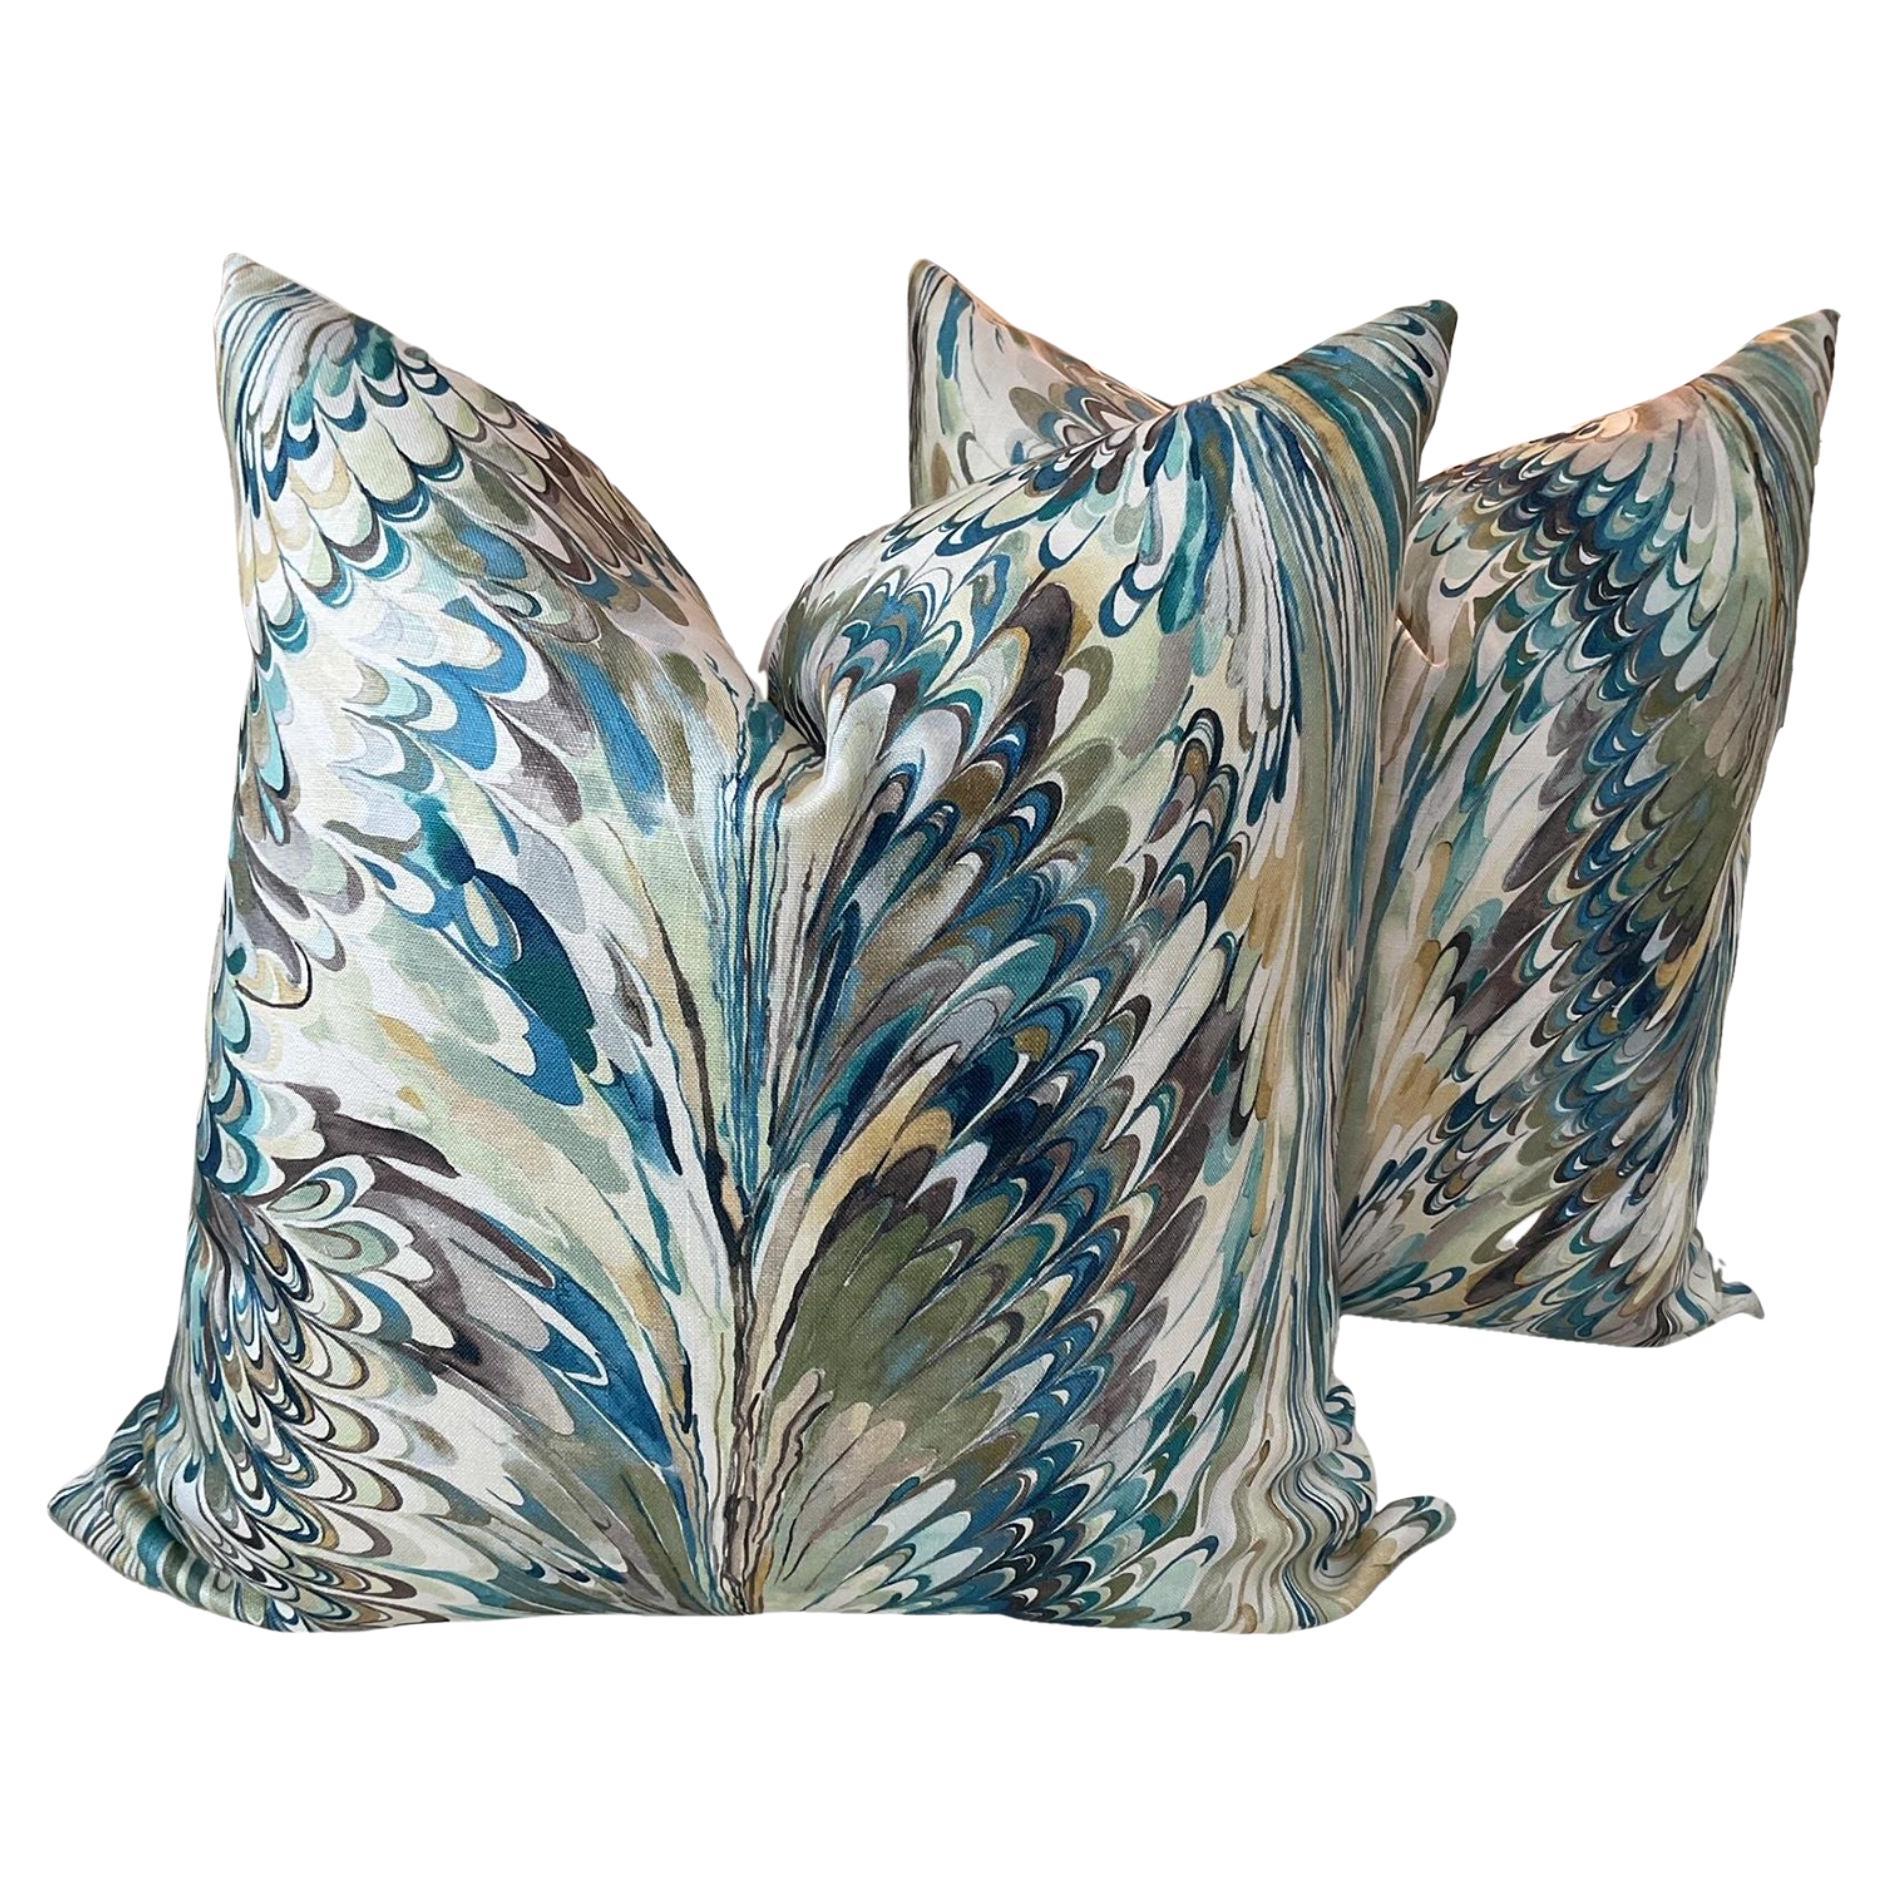 Lee Jofa " Taplow" in Peacock and Gold Pillows- a Pair For Sale